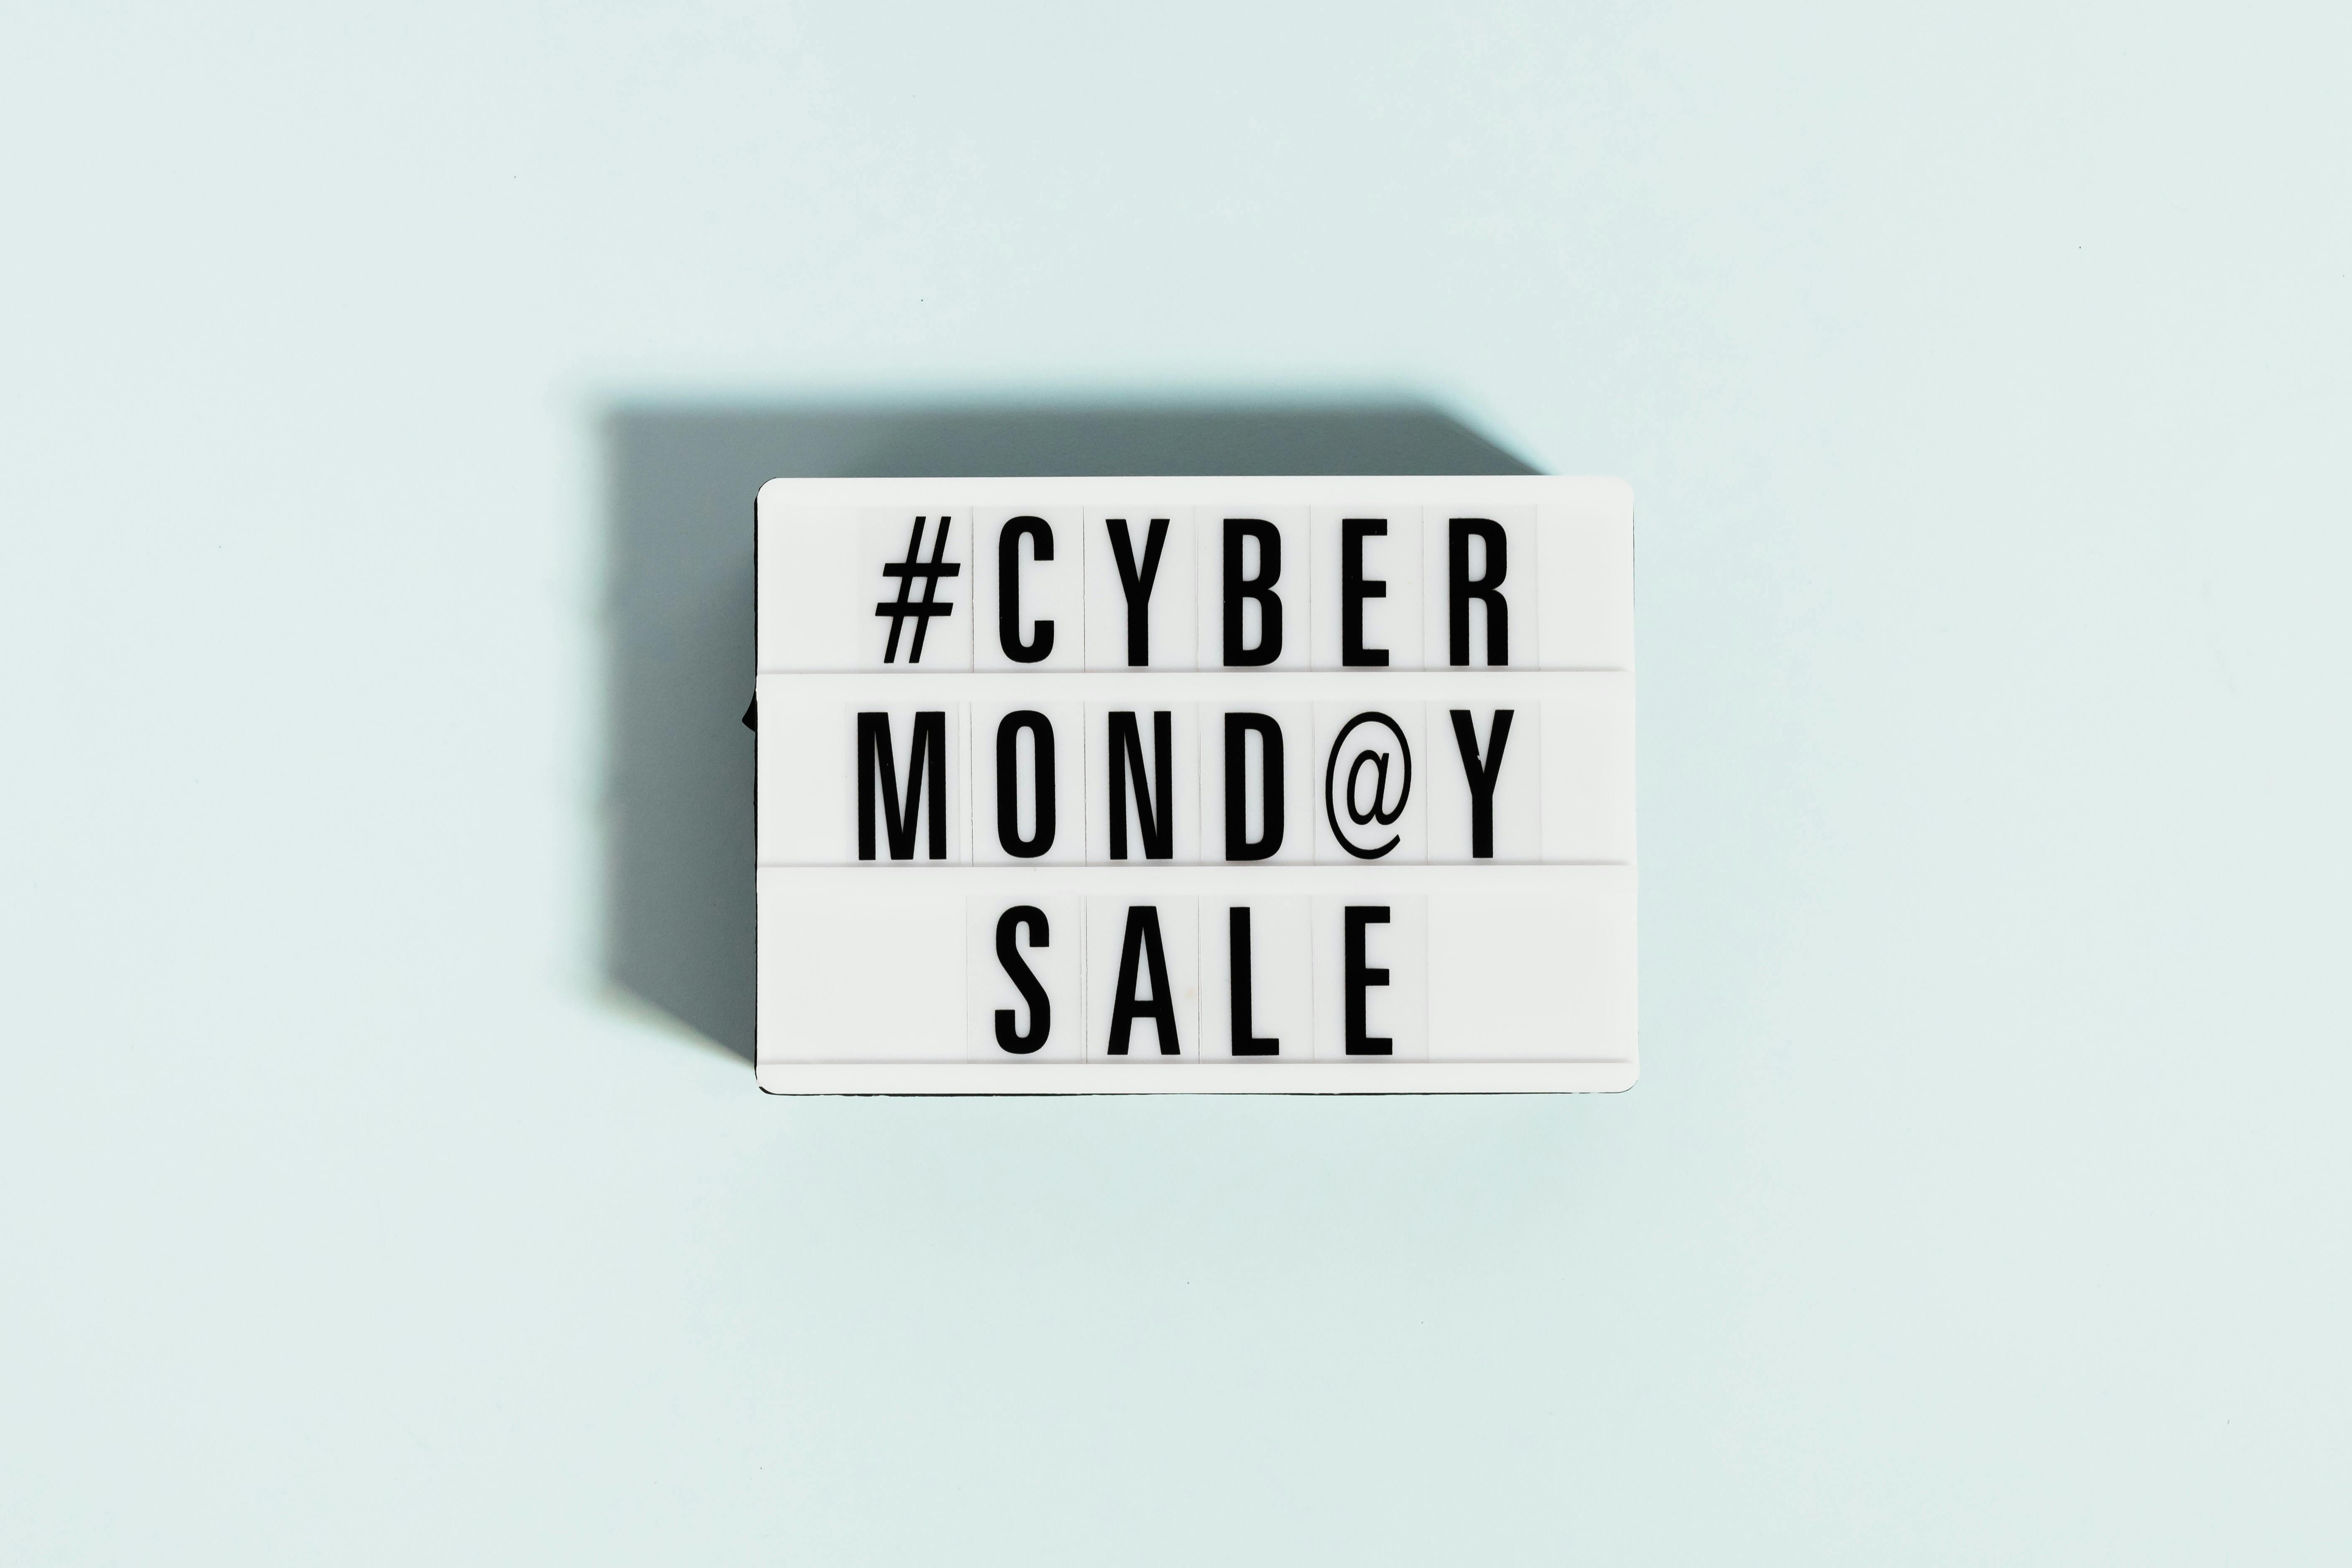 Cyber monday photos, download the best free cyber monday stock photos & hd images